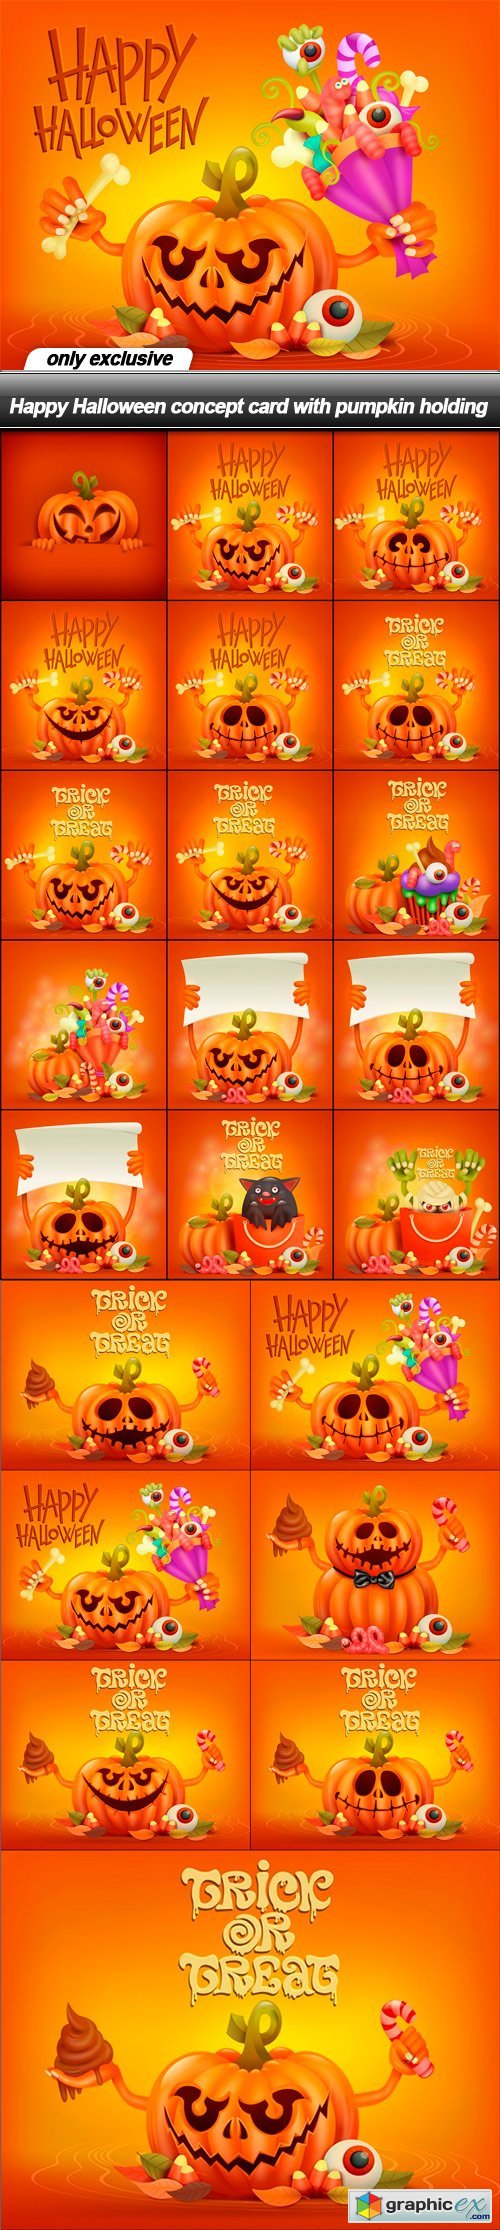 Happy Halloween concept card with pumpkin holding - 22 EPS